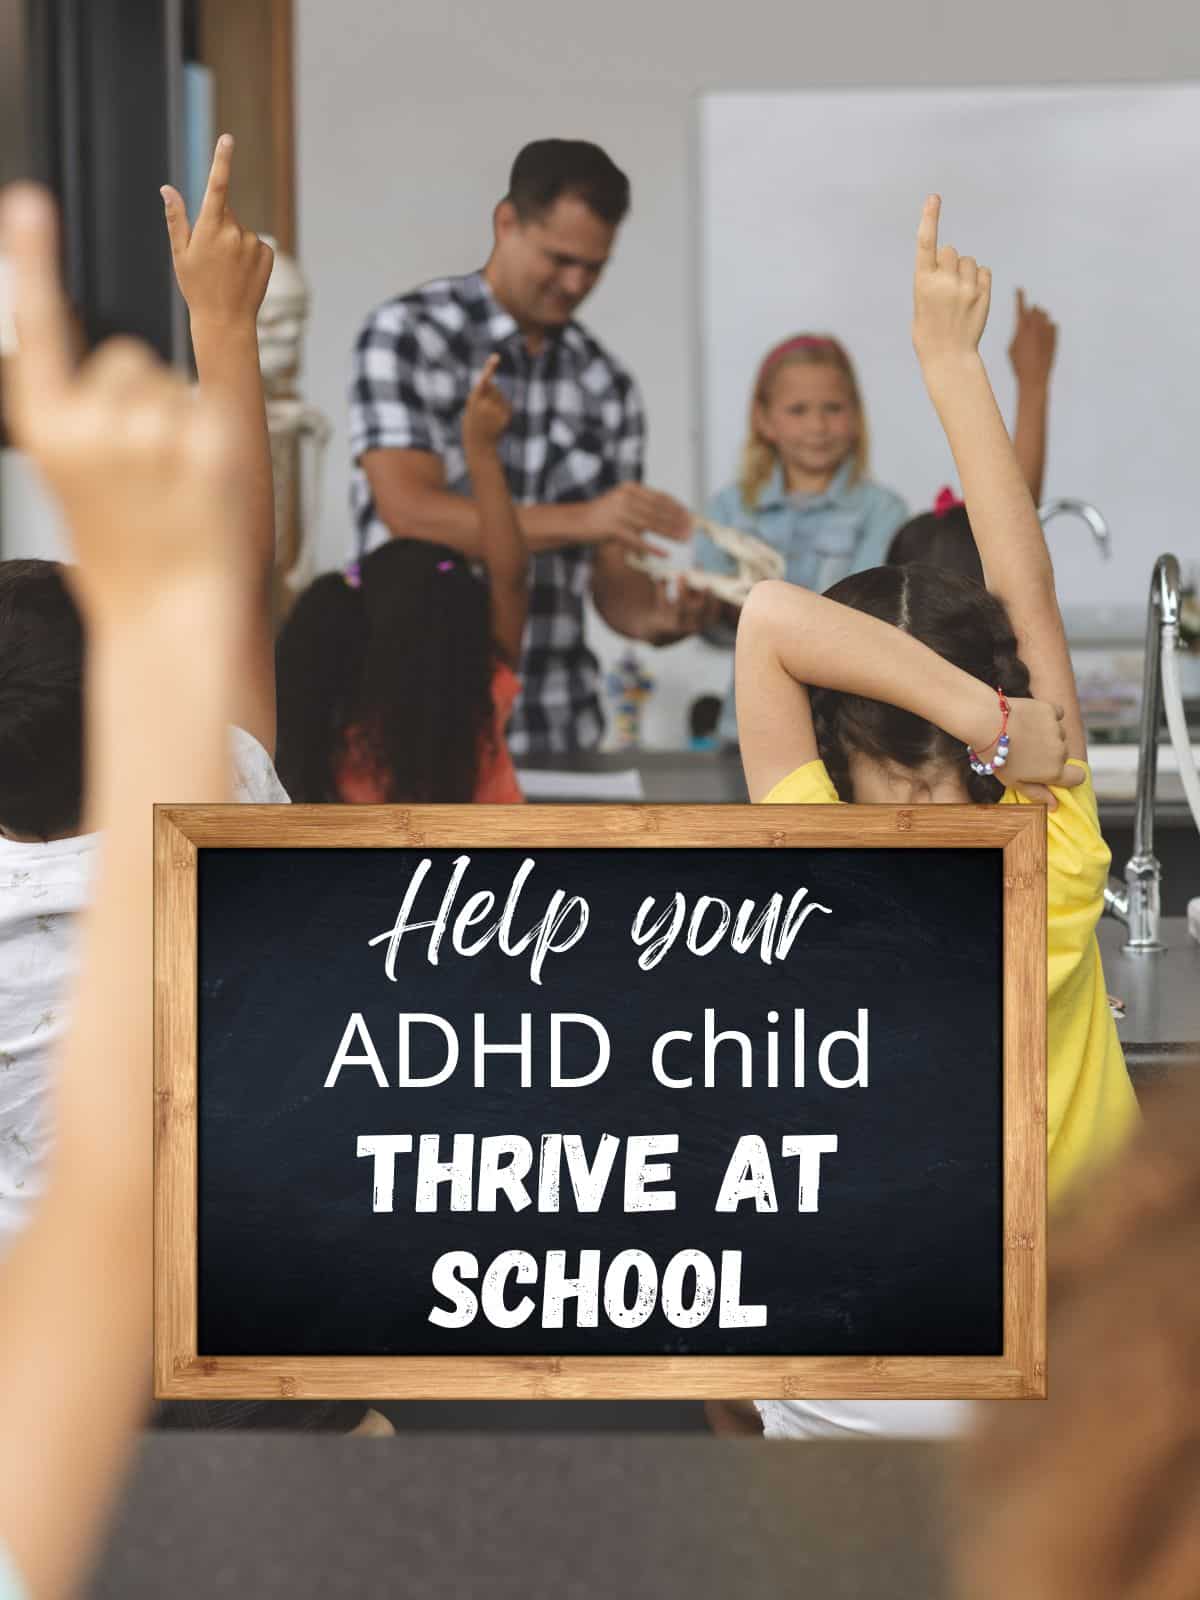 Children at school raising their hands with their teacher at the front of the class, and the text "help your ADHD child thrive at school."